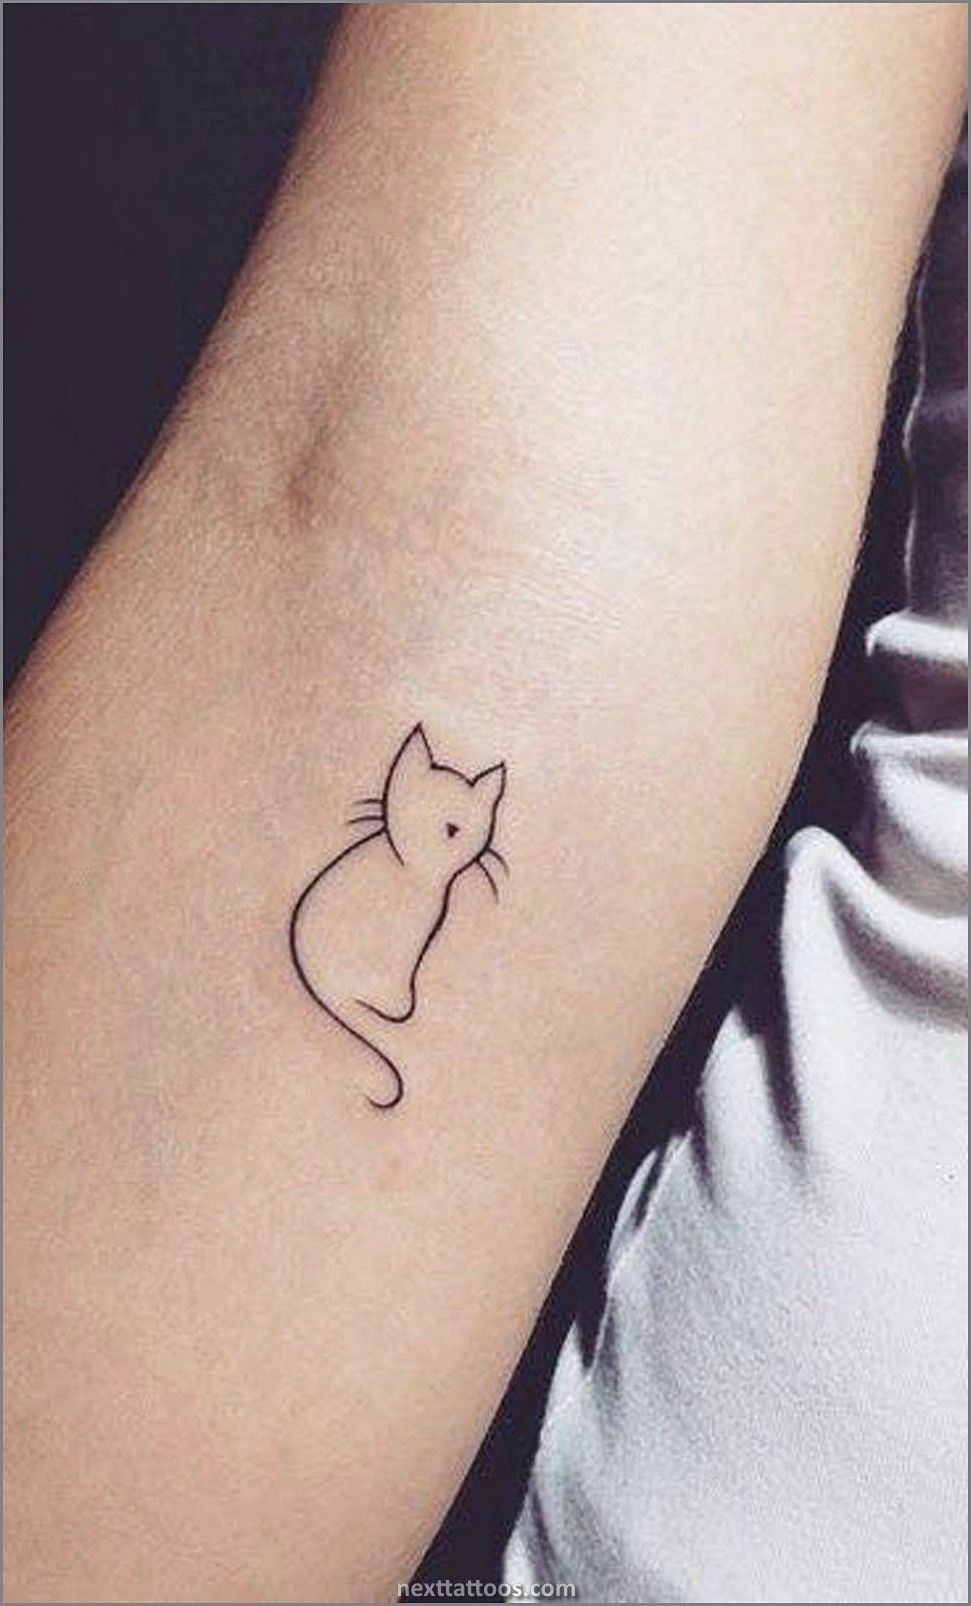 Simple Tattoos For Men and Women